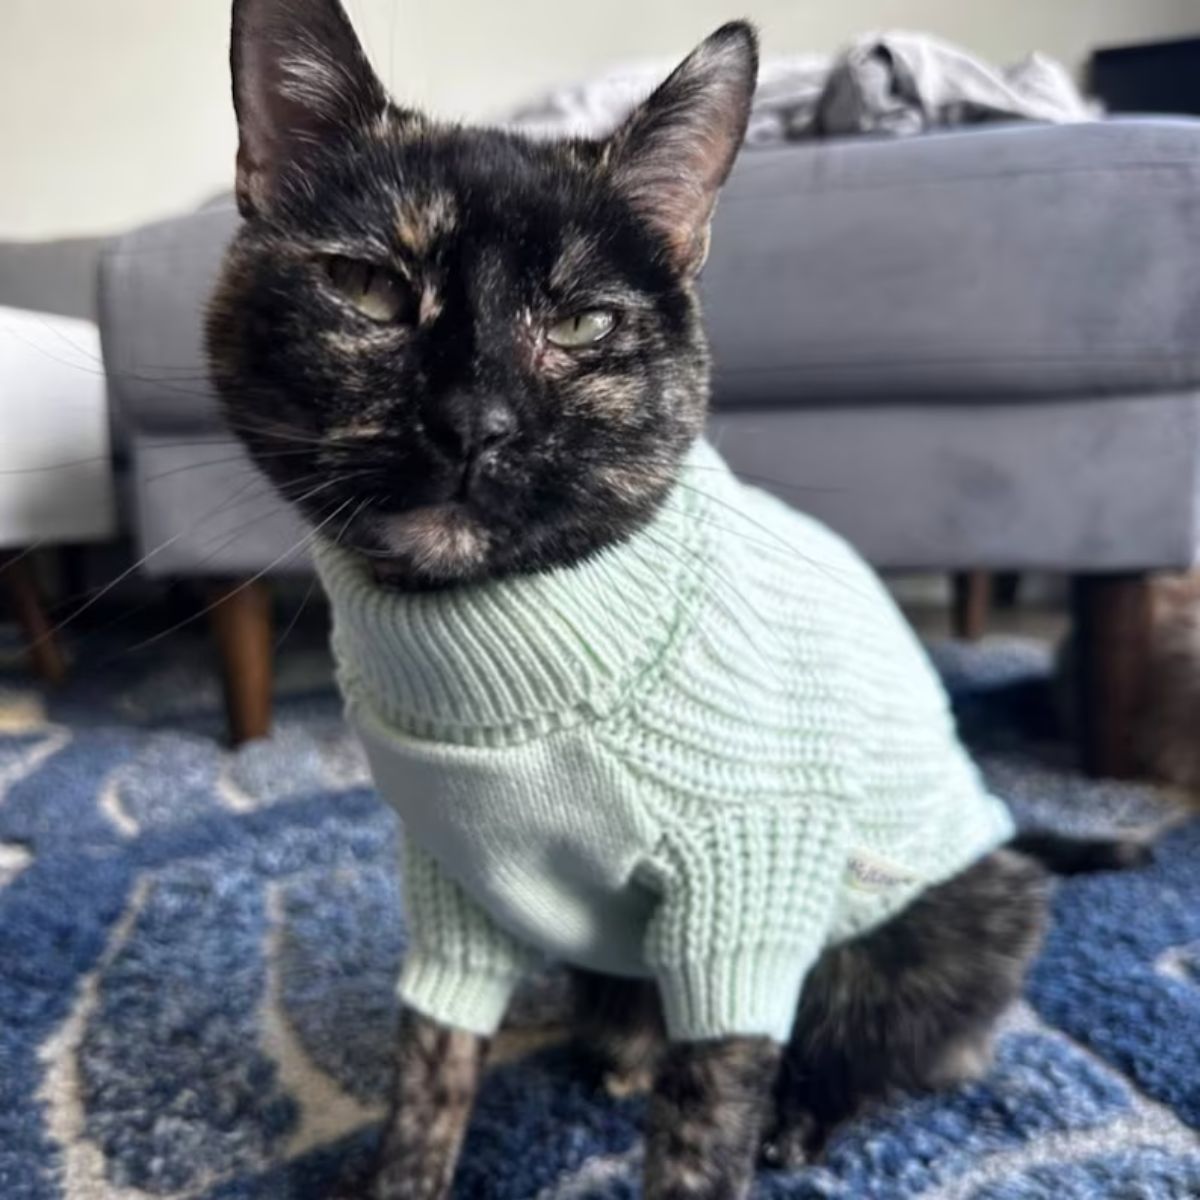 A cat wearing a knitted sweater.